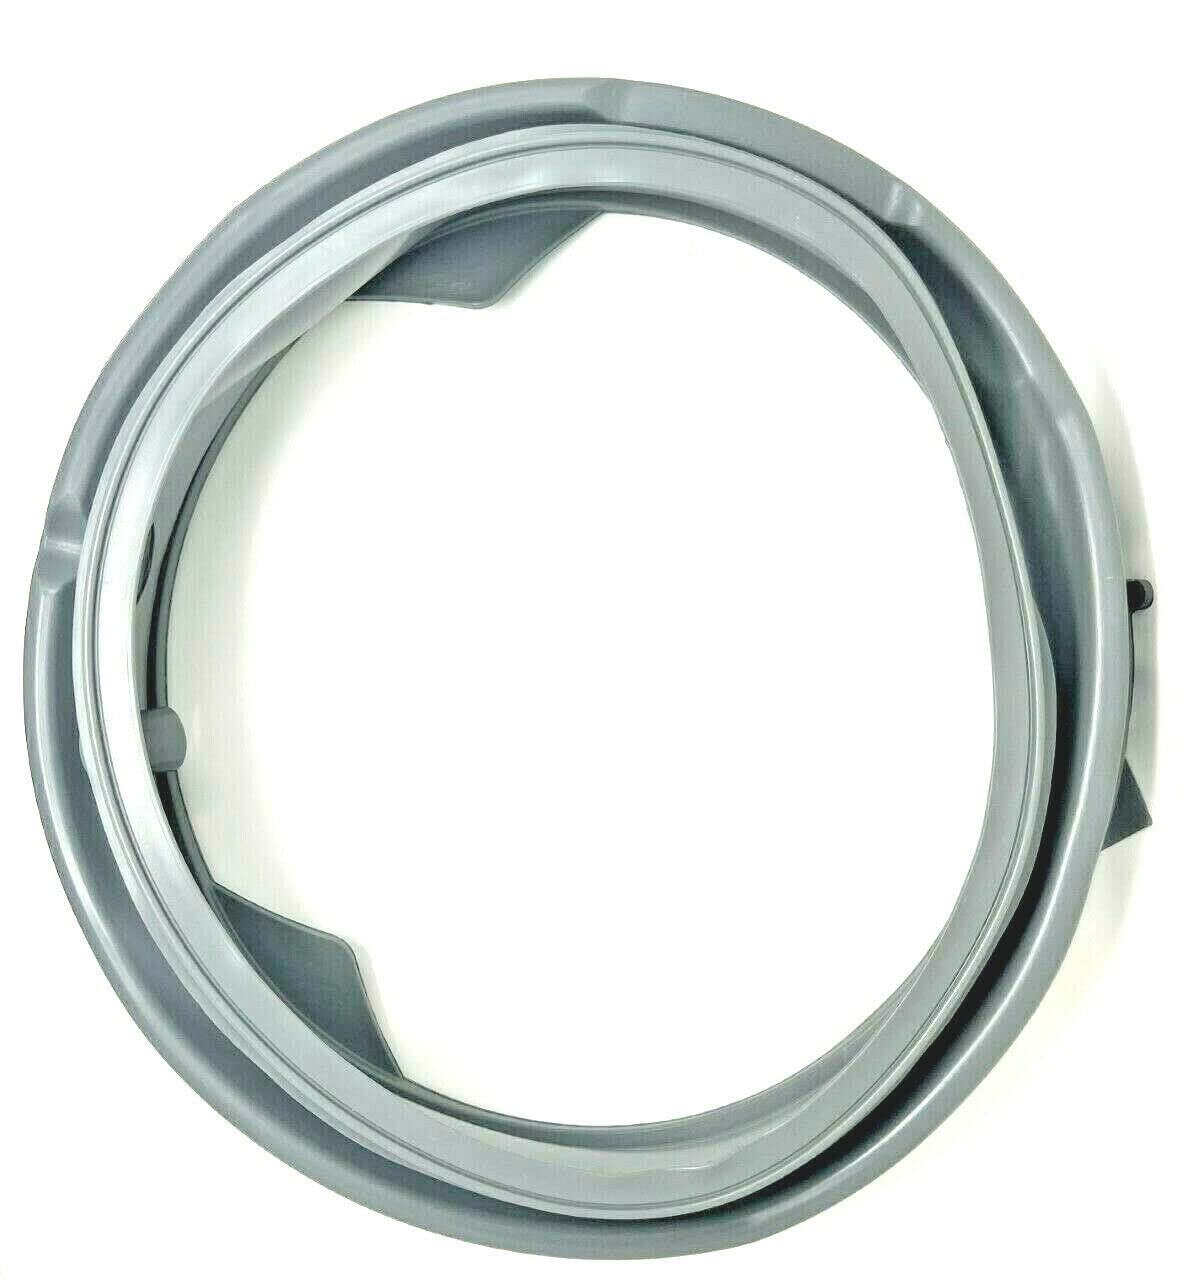 Seal Pro W11314648 Washer Door Seal gasket for Various washers W10897390, AP6835703, 4931032, PS12711495